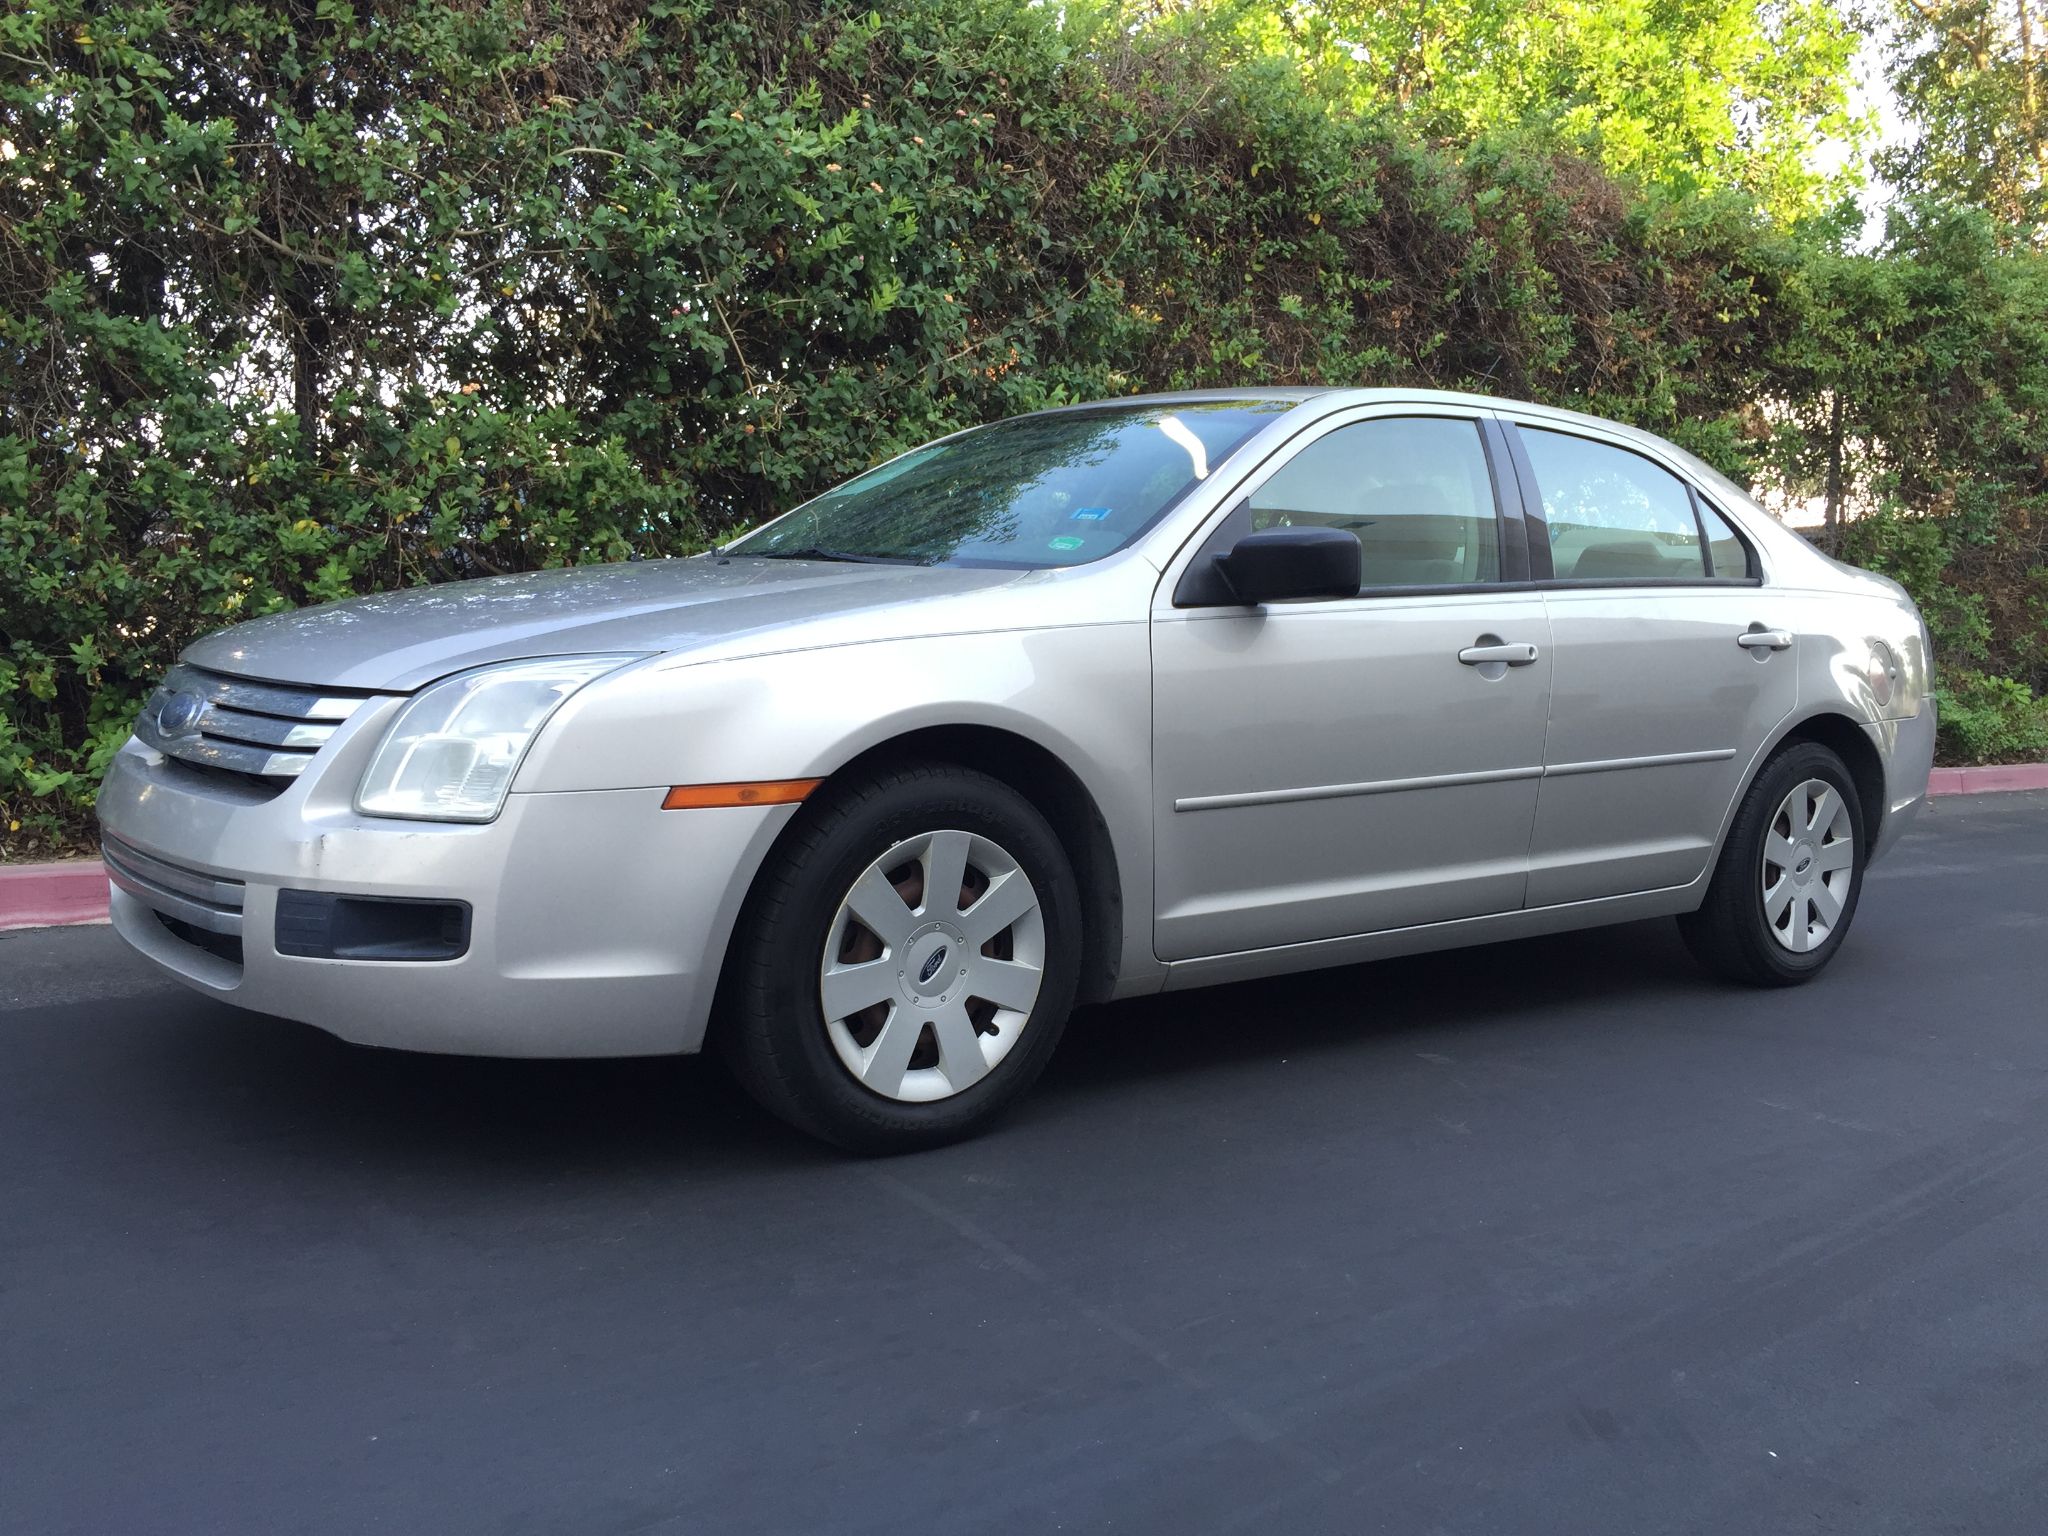 Used 2007 Ford Fusion SE (4cyl) at City Cars Warehouse INC